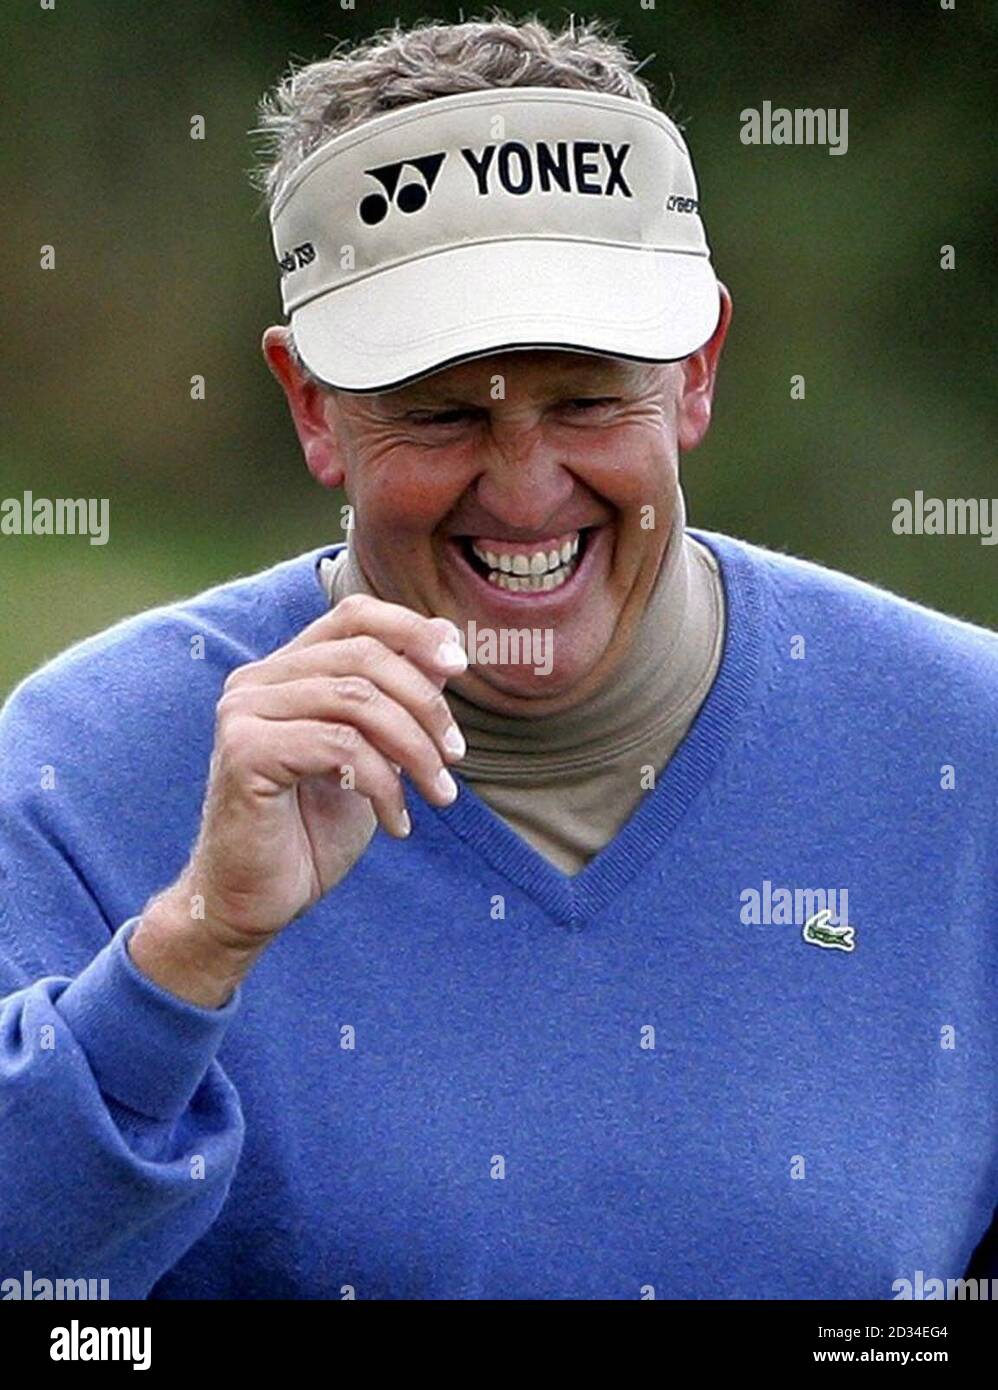 Scotland's Colin Montgomerie during the second round of the Dunhill Links Championships at St Andrews Golf Course, Fife, Scotland, Friday September 30, 2005. PRESS ASSOCIATION Photo. Photo credit should read: Andrew Milligan/PA. Stock Photo